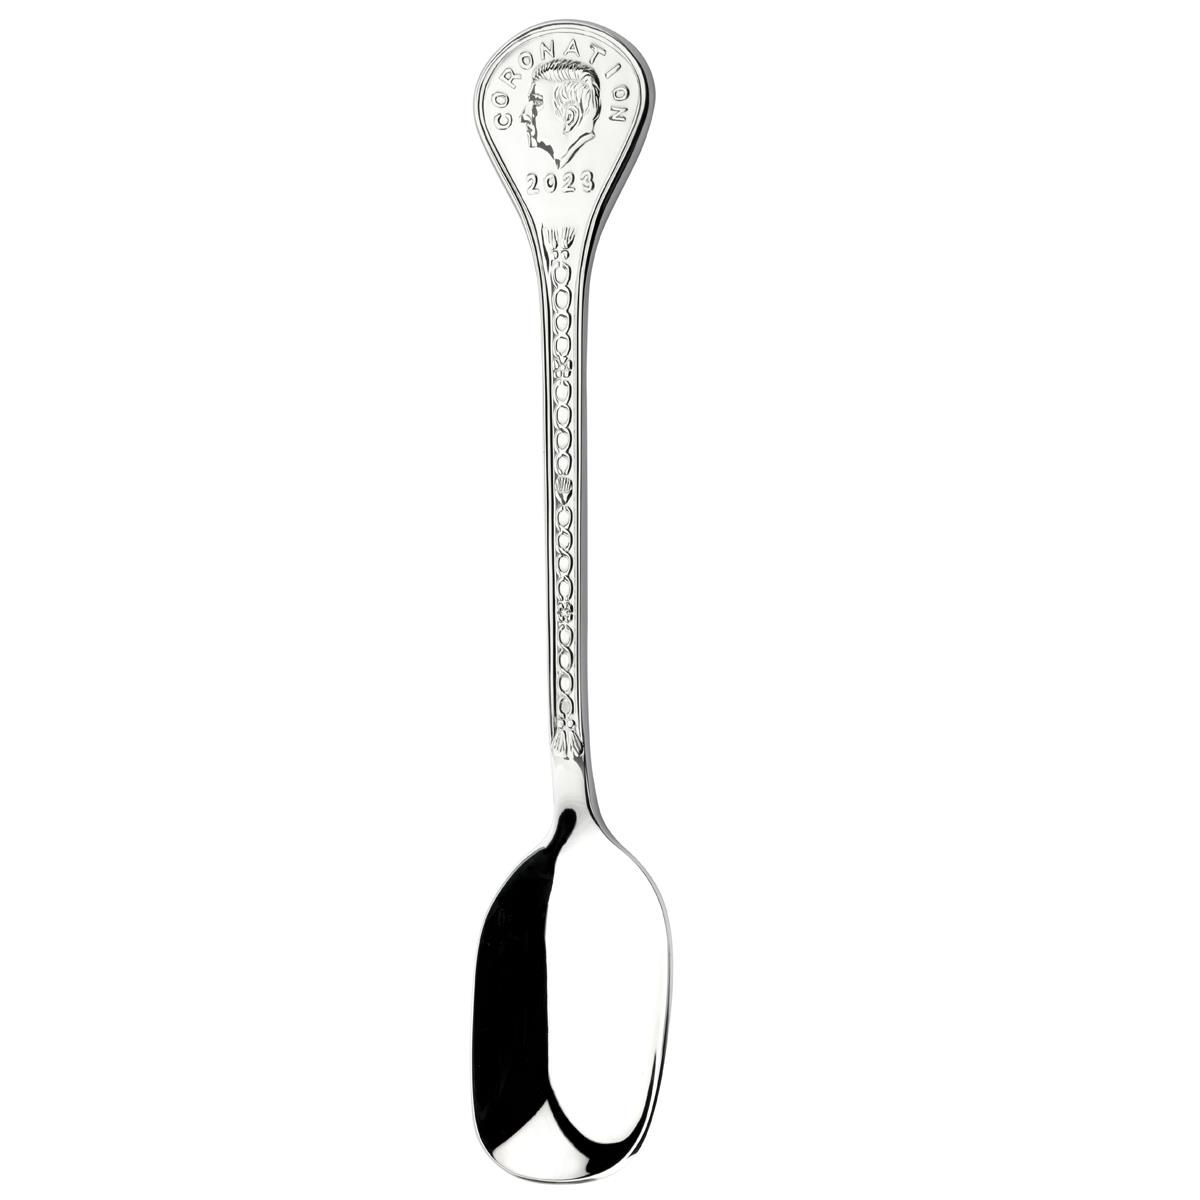 How is the handle designed on the coronation spoon 2023 from Arthur Price?